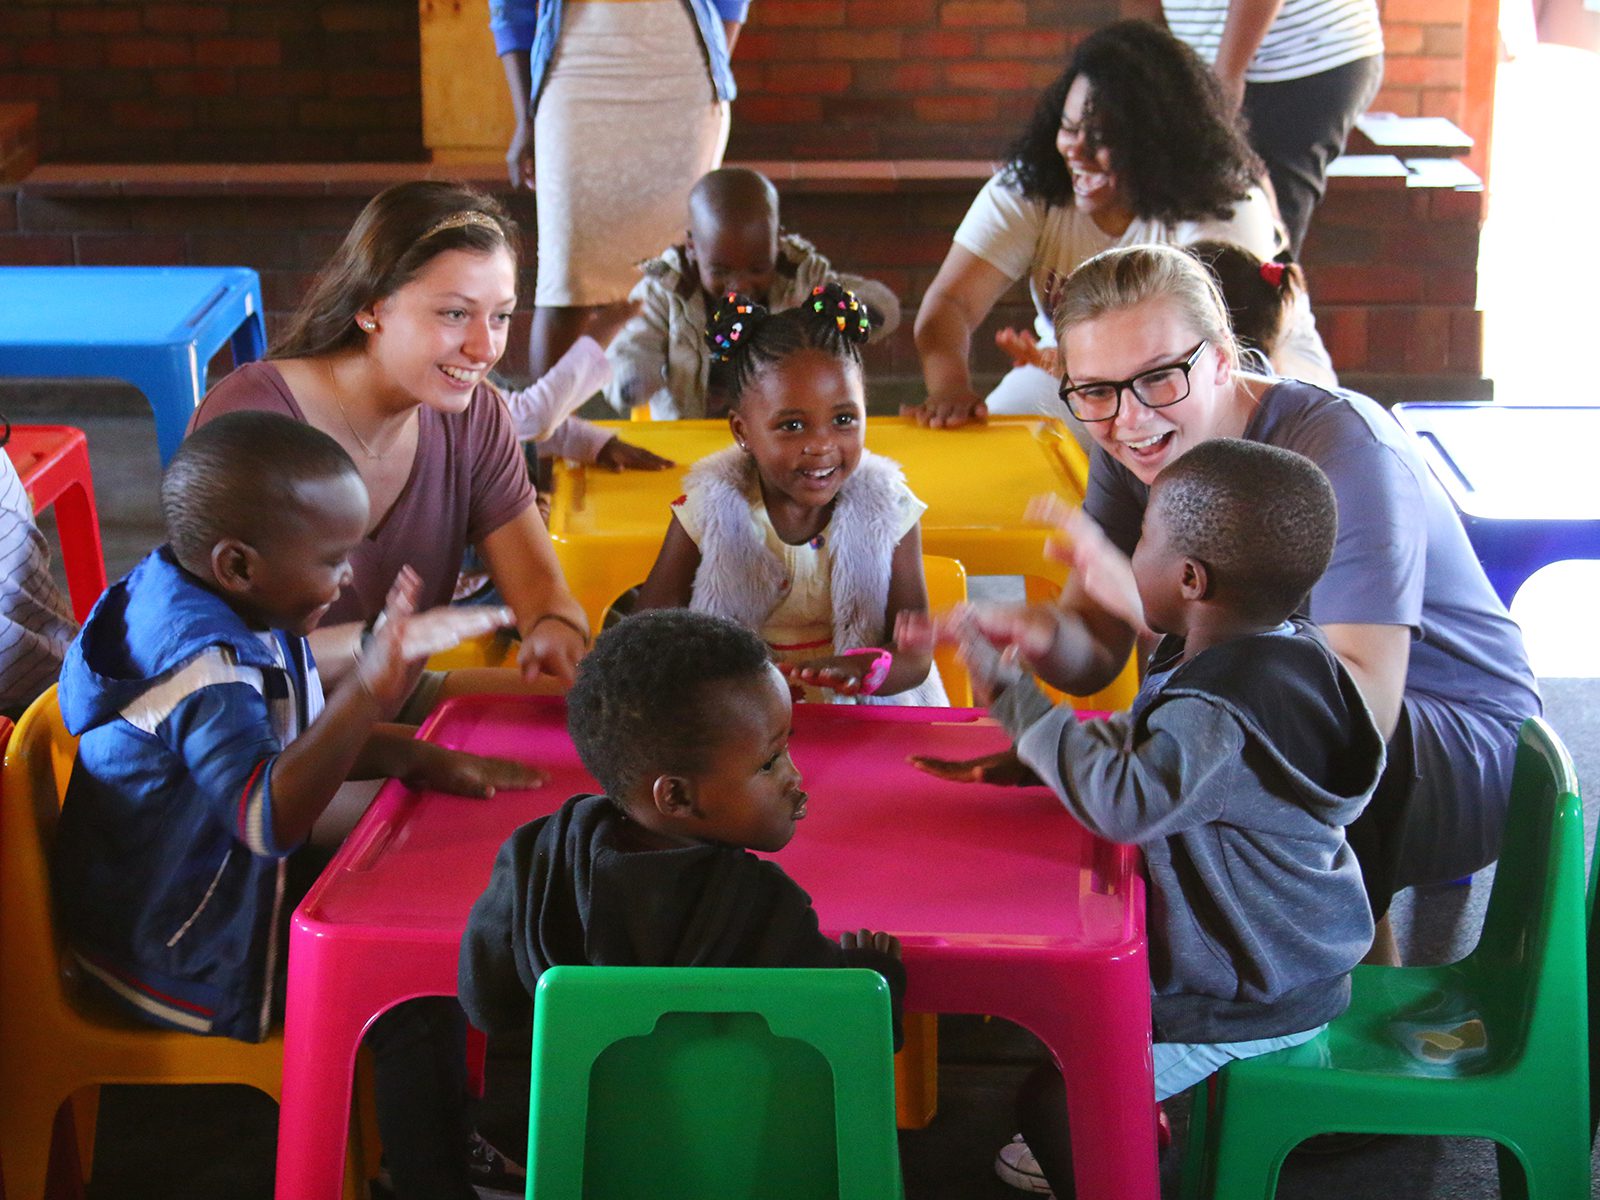 Olivet_Missions In Action_South Africa_2018 M.I.A. trip_Web1.jpg